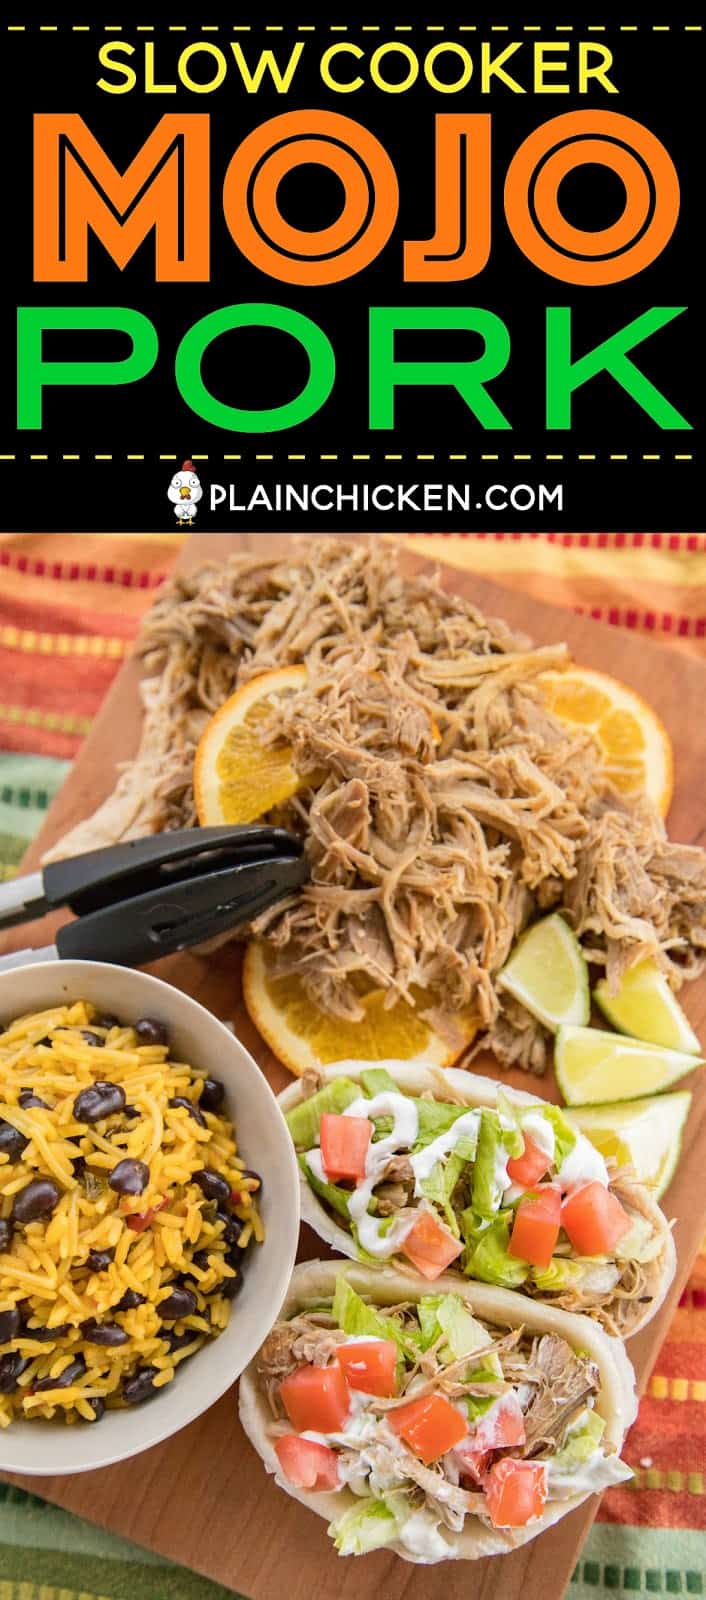 Slow Cooker MOJO Pork - pork shoulder slow cooked in garlic, cumin, oregano, orange juice and lime juice. SO good!!! Serve in tortillas or a bowl with rice, beans and your favorite taco toppings. Freeze the leftover pork for a quick meal later!! So much amazing flavor in this easy dinner! #slowcooker #pork #tacos